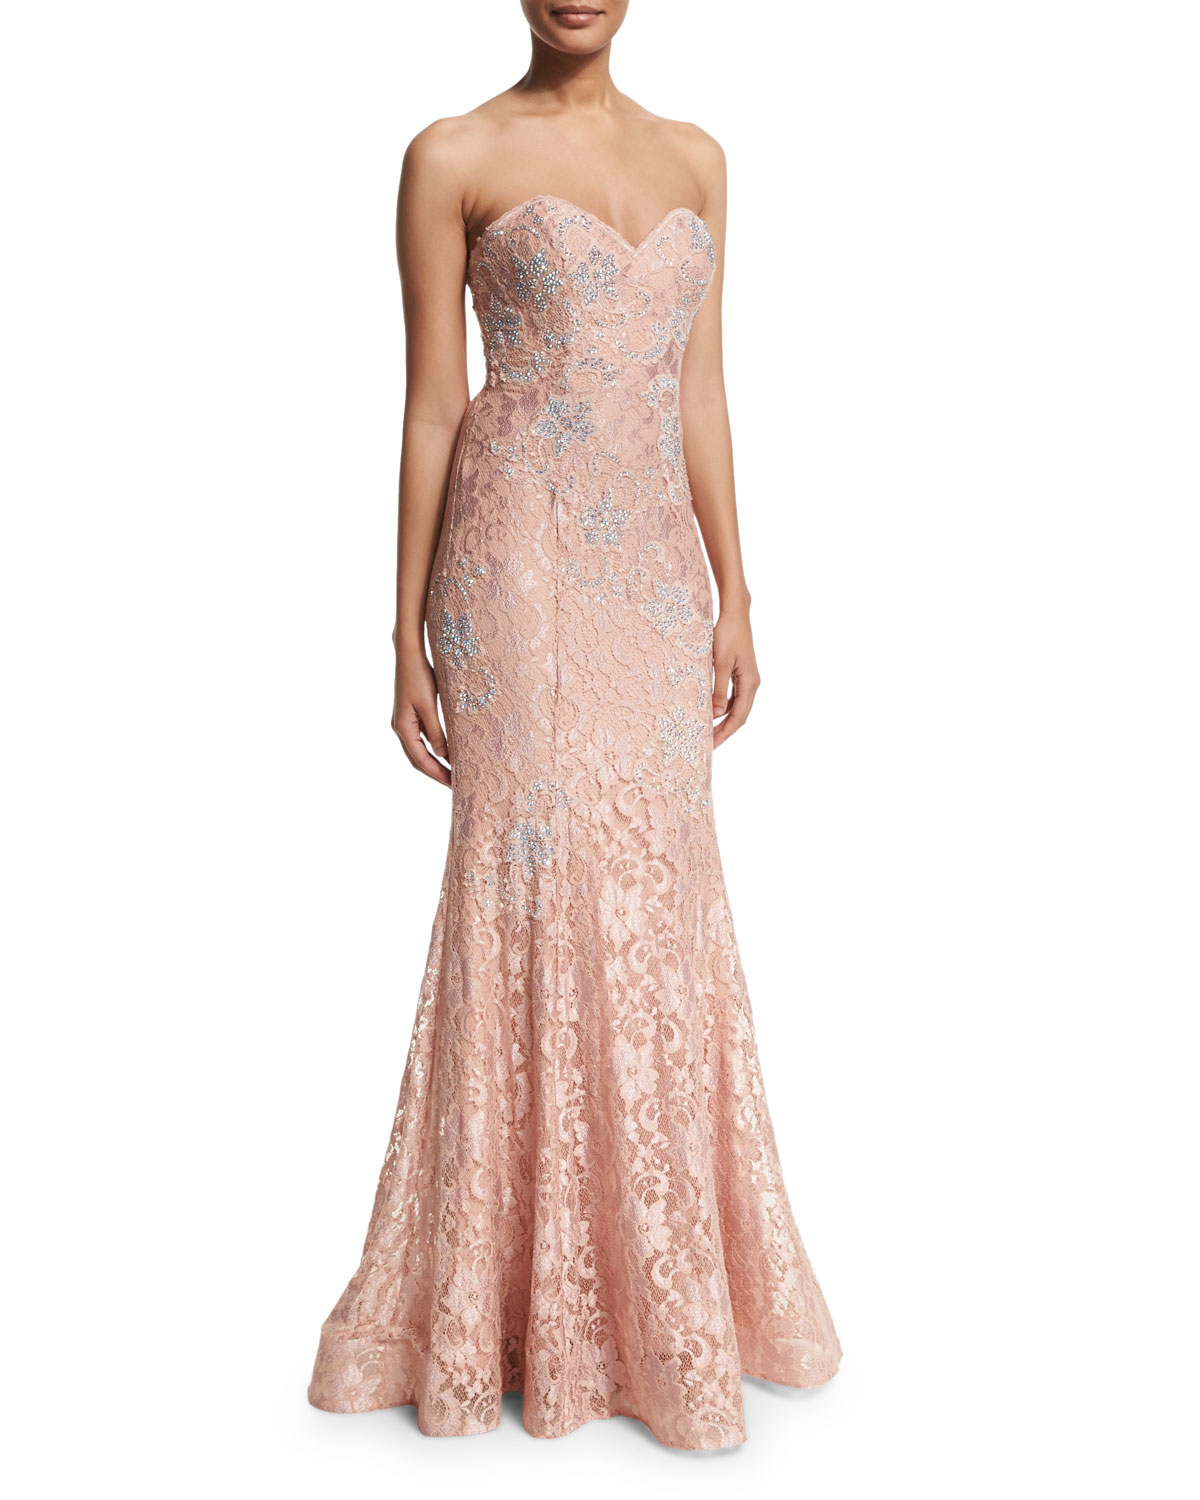 Lyst - Jovani Strapless Lace Mermaid Gown in Pink